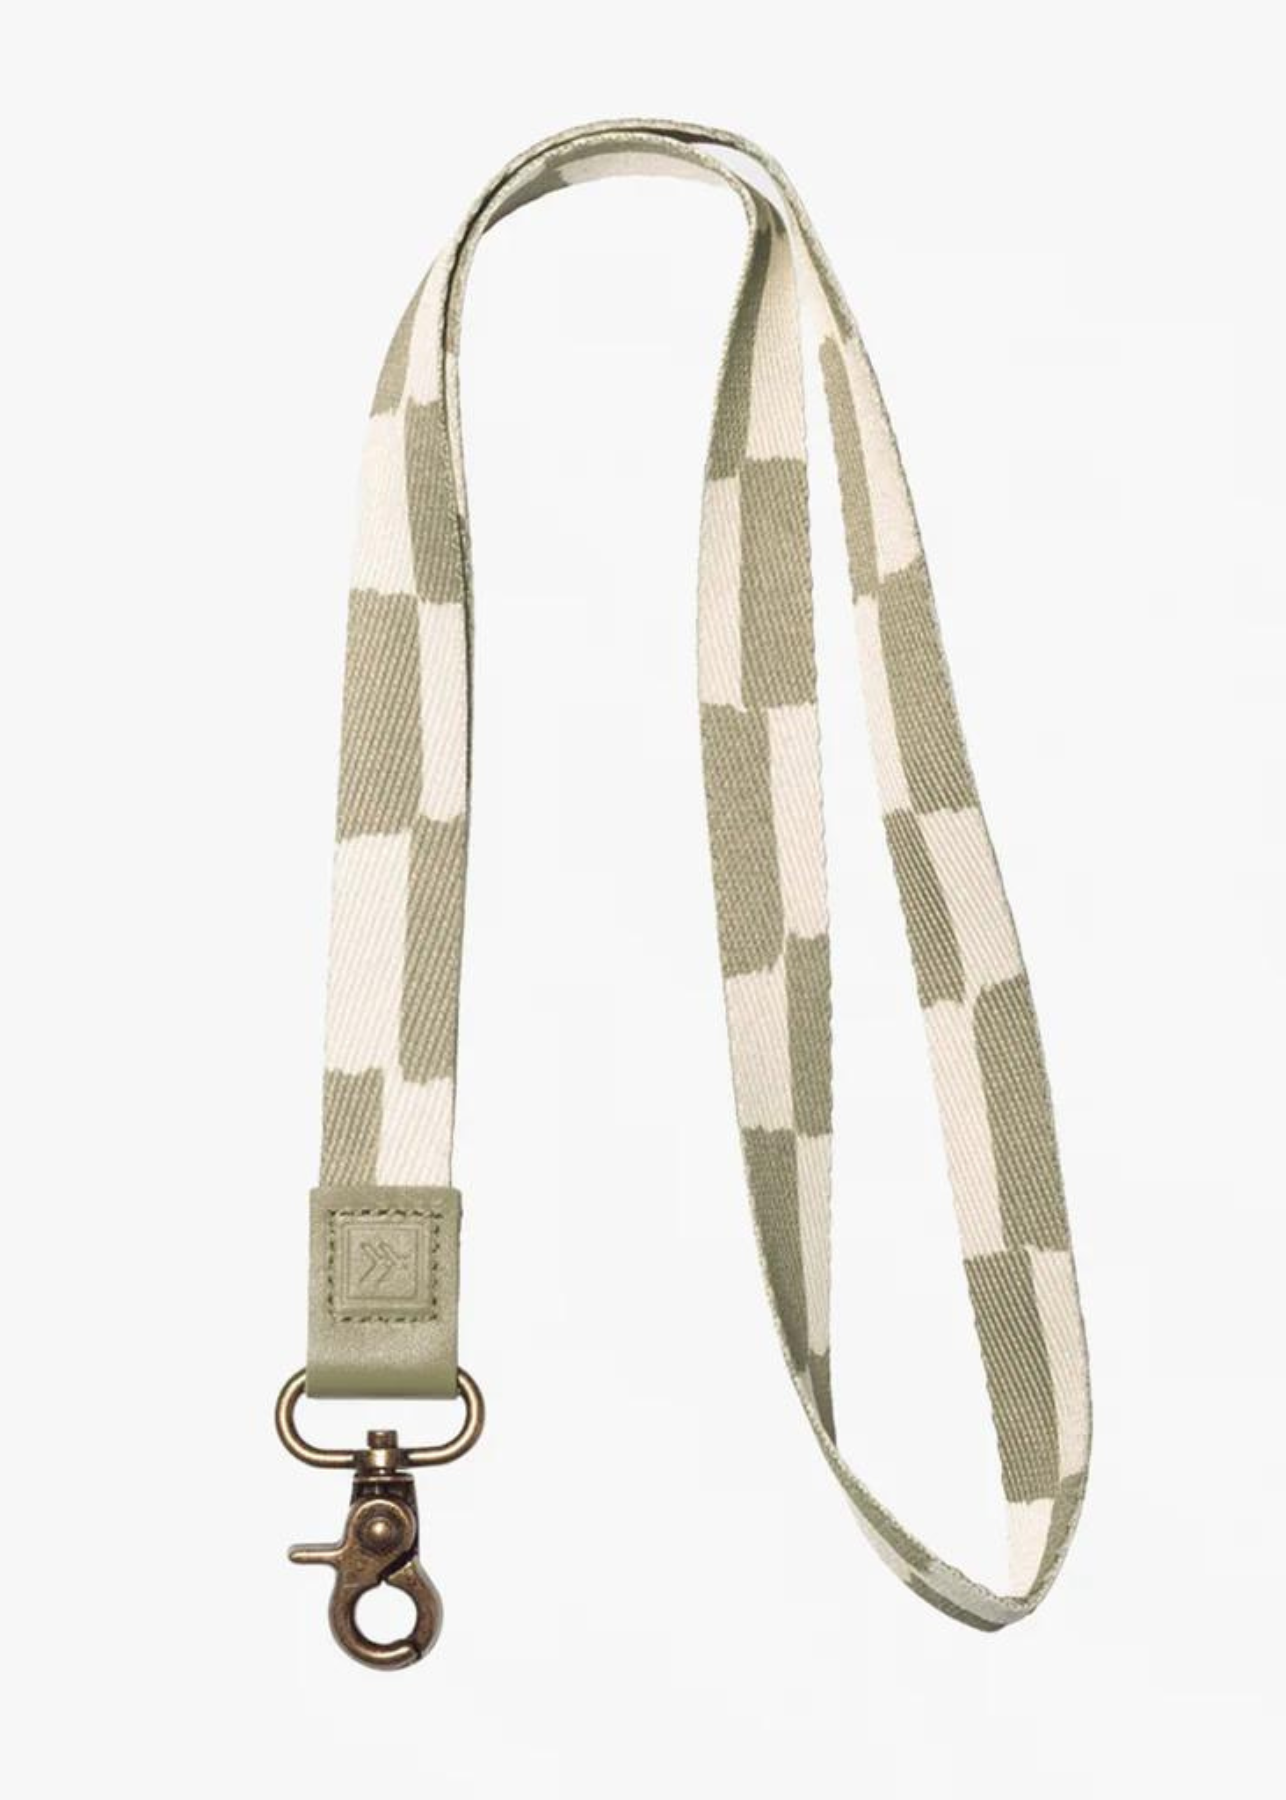 Thread Wallets Scout Neck Lanyard